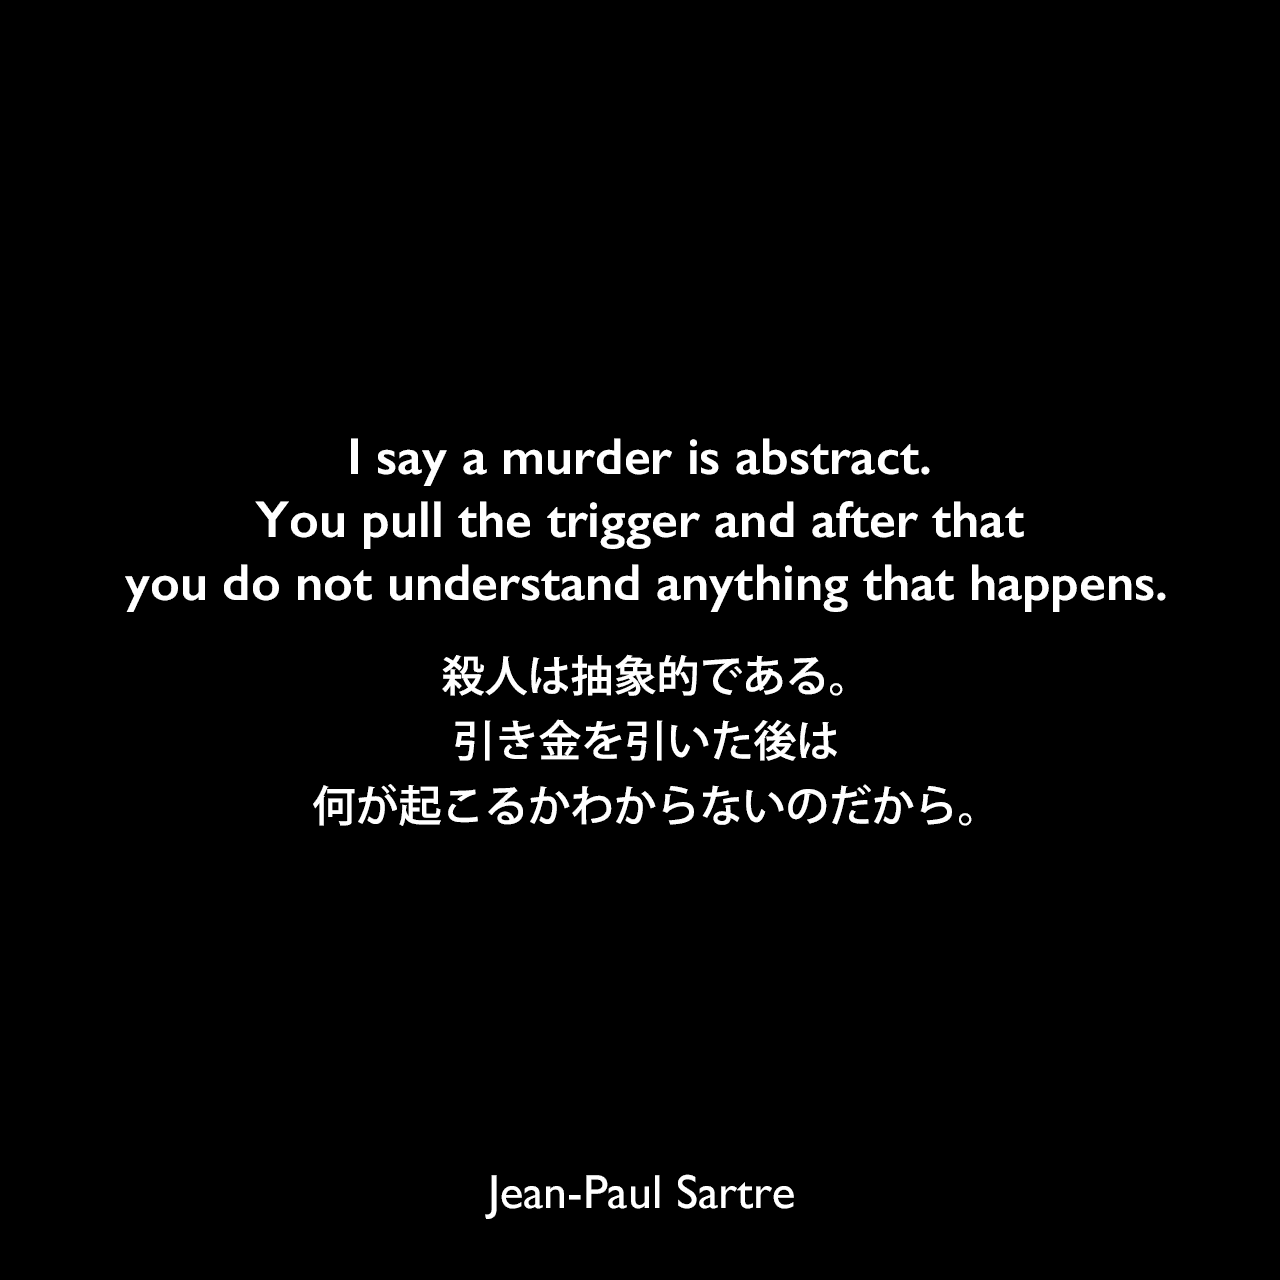 I say a murder is abstract. You pull the trigger and after that you do not understand anything that happens.殺人は抽象的である。引き金を引いた後は何が起こるかわからないのだから。- サルトルによる戯曲「Maile Hath」よりJean-Paul Sartre